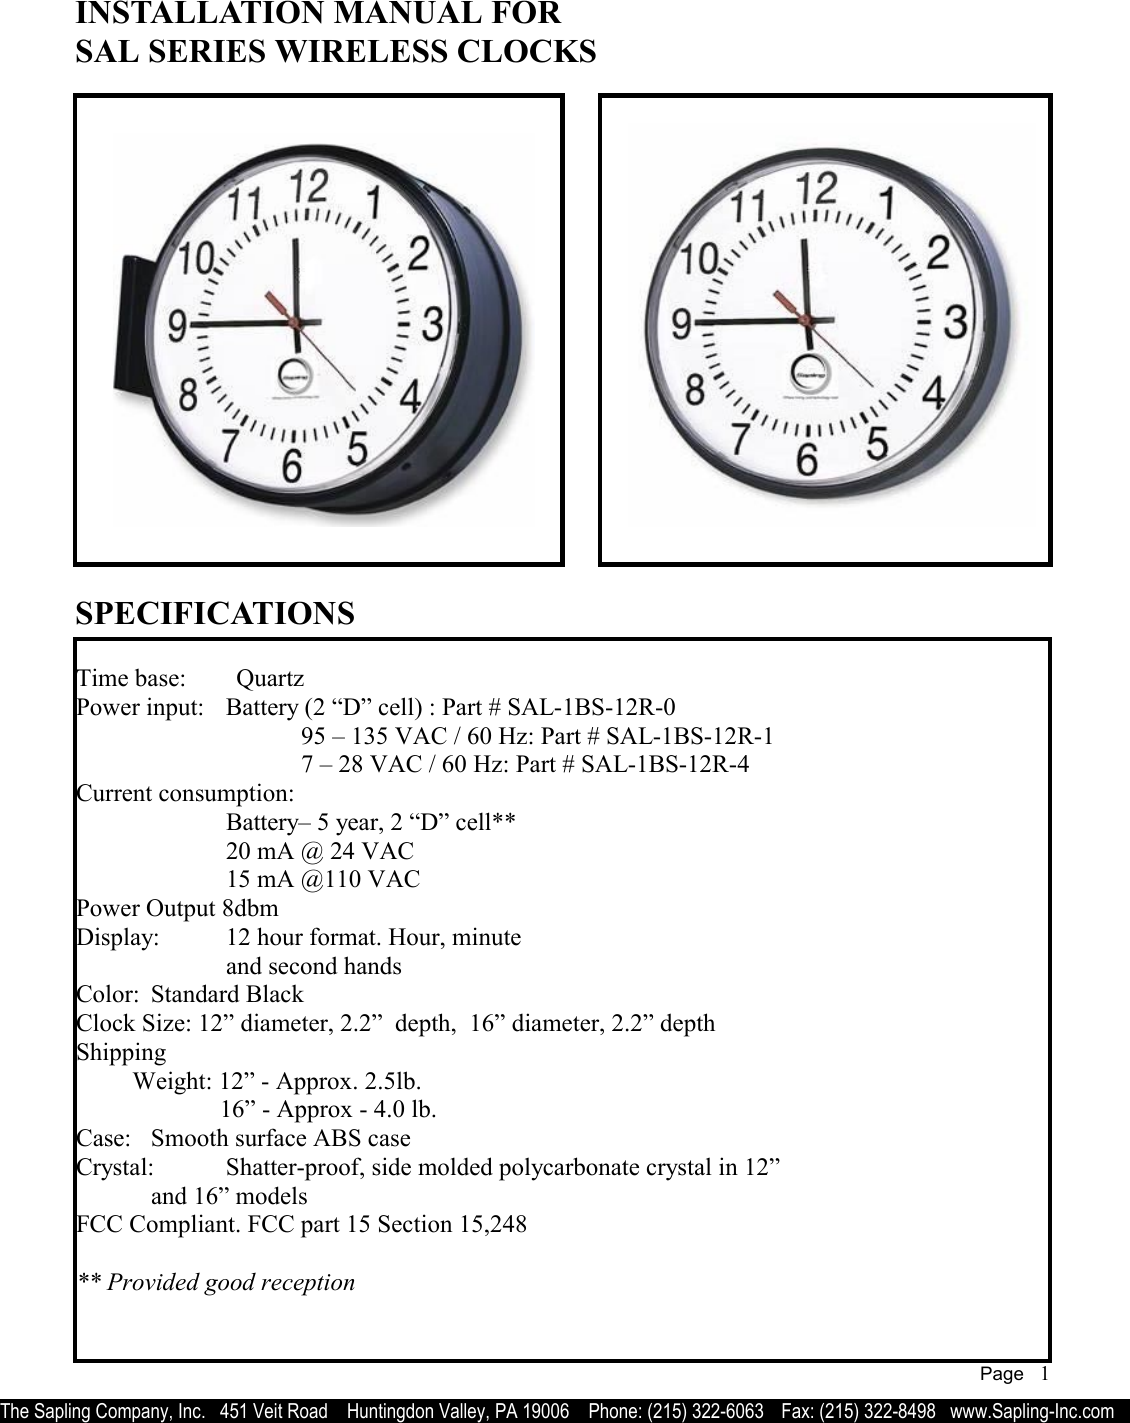   INSTALLATION MANUAL FOR SAL SERIES WIRELESS CLOCKS  Time base:        Quartz      Power input:  Battery (2 “D” cell) : Part # SAL-1BS-12R-0          95 – 135 VAC / 60 Hz: Part # SAL-1BS-12R-1         7 – 28 VAC / 60 Hz: Part # SAL-1BS-12R-4  Current consumption:           Battery– 5 year, 2 “D” cell**       20 mA @ 24 VAC        15 mA @110 VAC  Power Output 8dbm Display:  12 hour format. Hour, minute      and second hands Color:  Standard Black  Clock Size: 12” diameter, 2.2”  depth,  16” diameter, 2.2” depth  Shipping          Weight: 12” - Approx. 2.5lb.                 16” - Approx - 4.0 lb. Case:  Smooth surface ABS case Crystal:  Shatter-proof, side molded polycarbonate crystal in 12”   and 16” models FCC Compliant. FCC part 15 Section 15,248  ** Provided good reception         SPECIFICATIONS The Sapling Company, Inc.   451 Veit Road    Huntingdon Valley, PA 19006    Phone: (215) 322-6063   Fax: (215) 322-8498   www.Sapling-Inc.com Page   1 